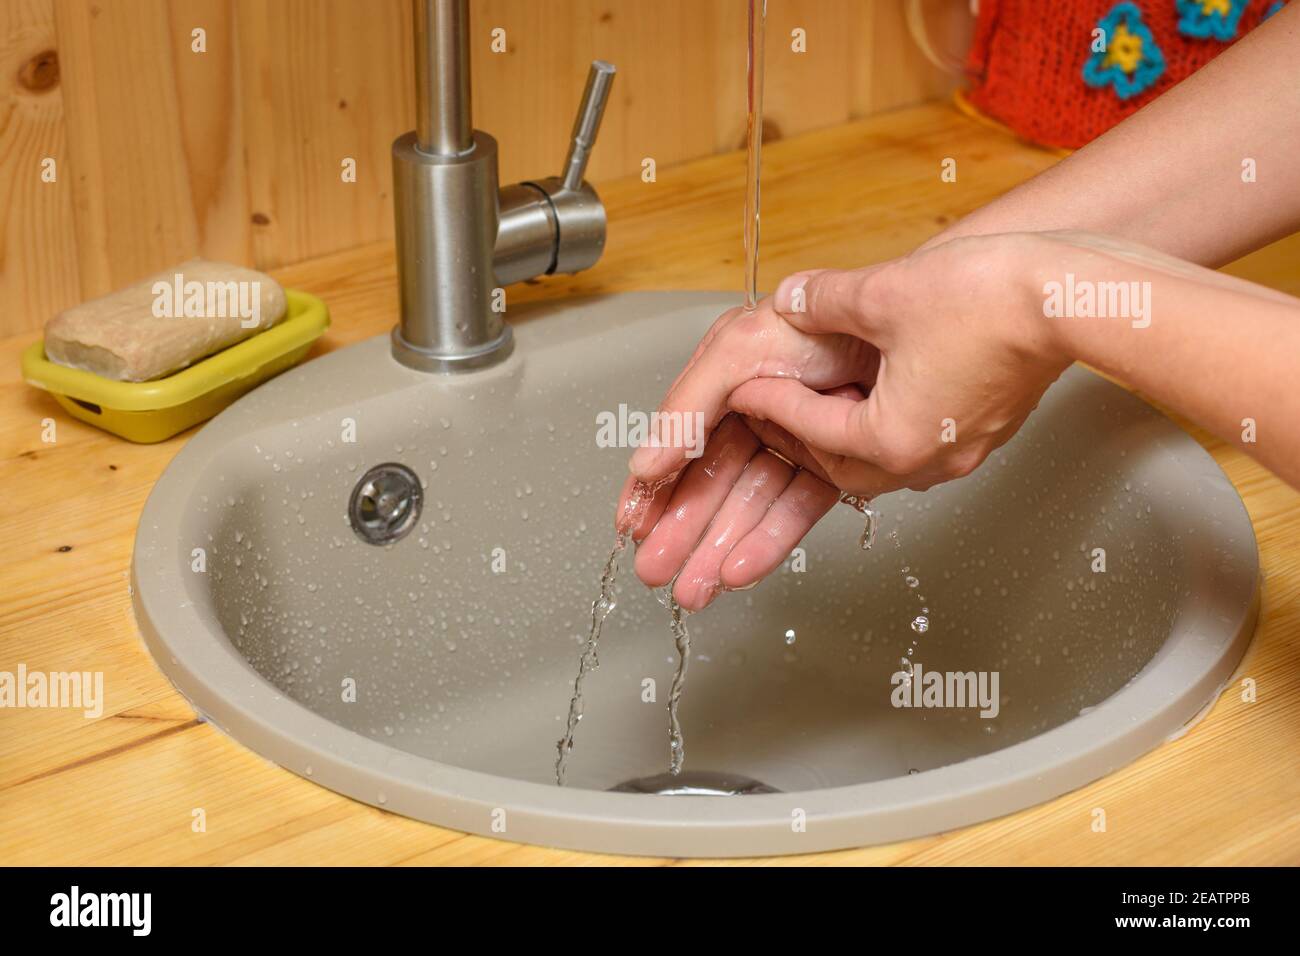 The girl's hands are washed with cold tap water the place of the burn on her arm Stock Photo